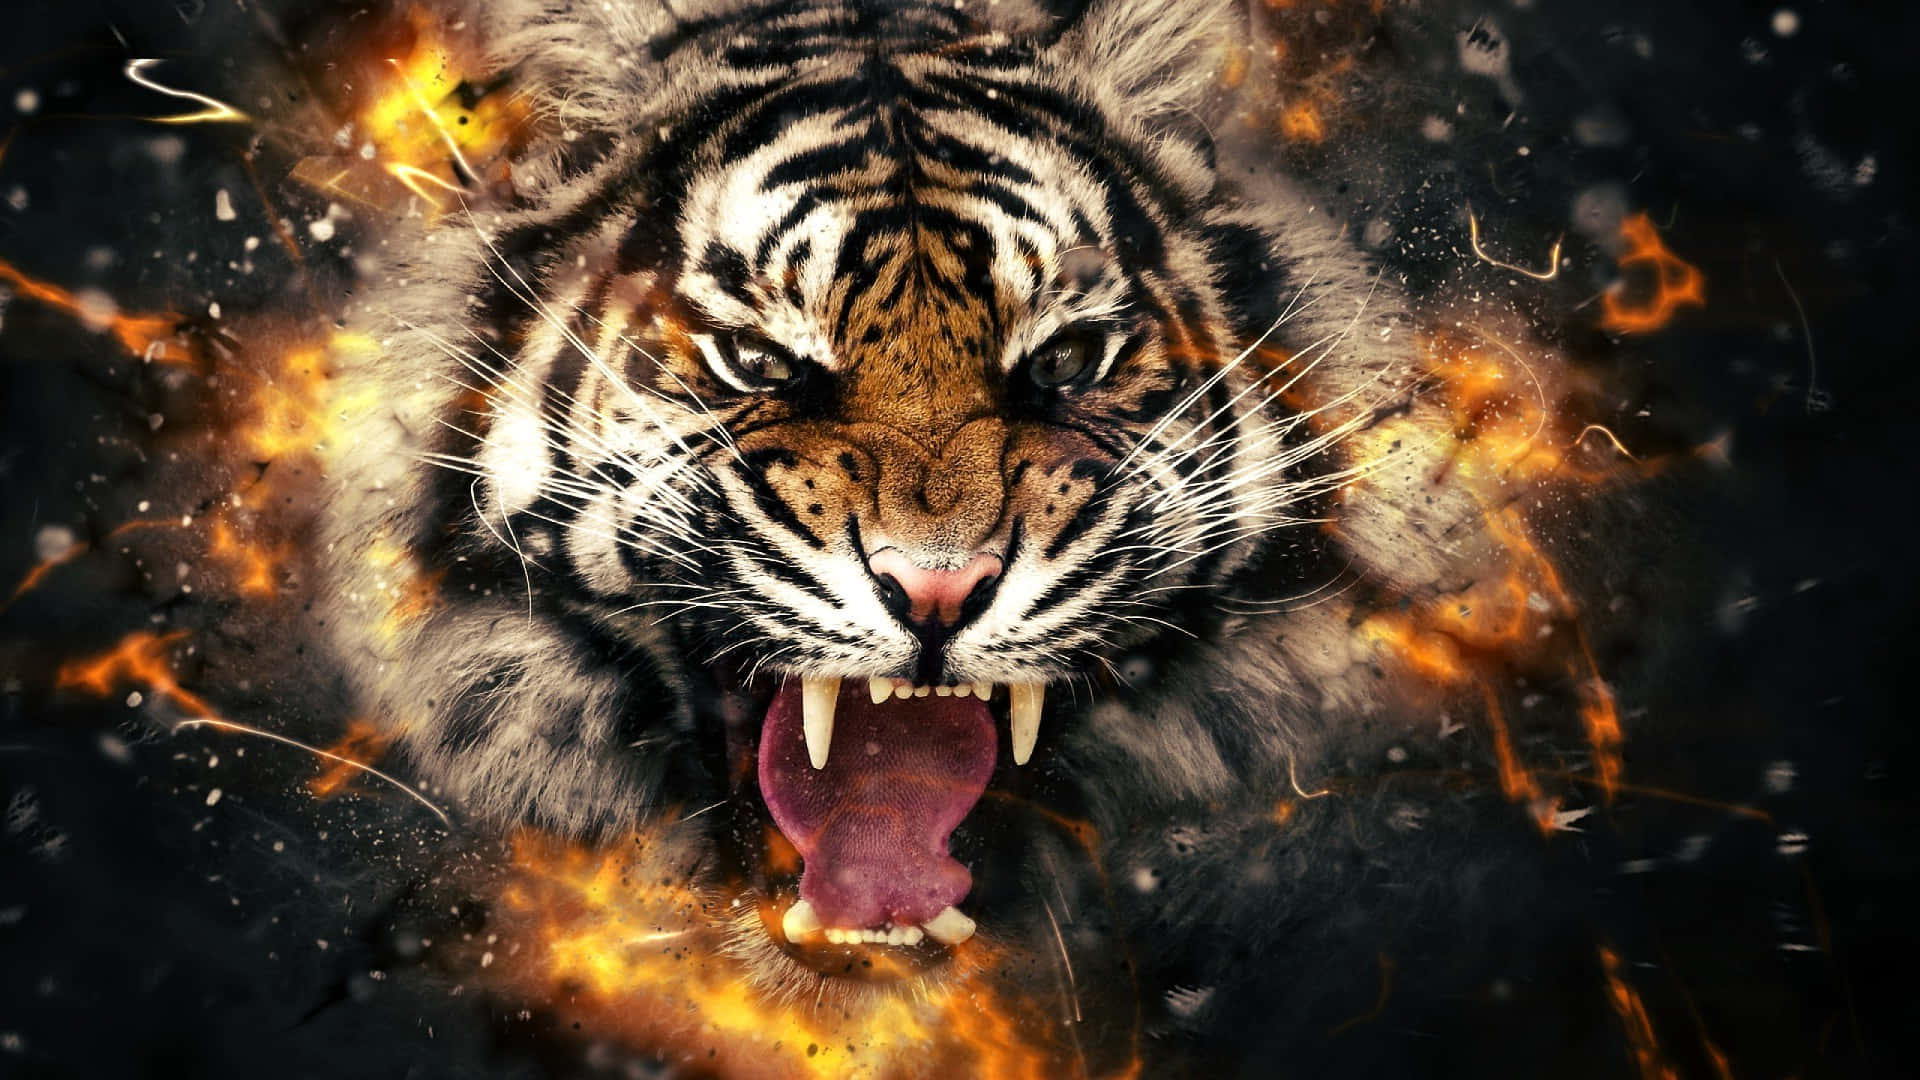 Free Tiger Face Wallpaper Downloads, [100+] Tiger Face Wallpapers for FREE  